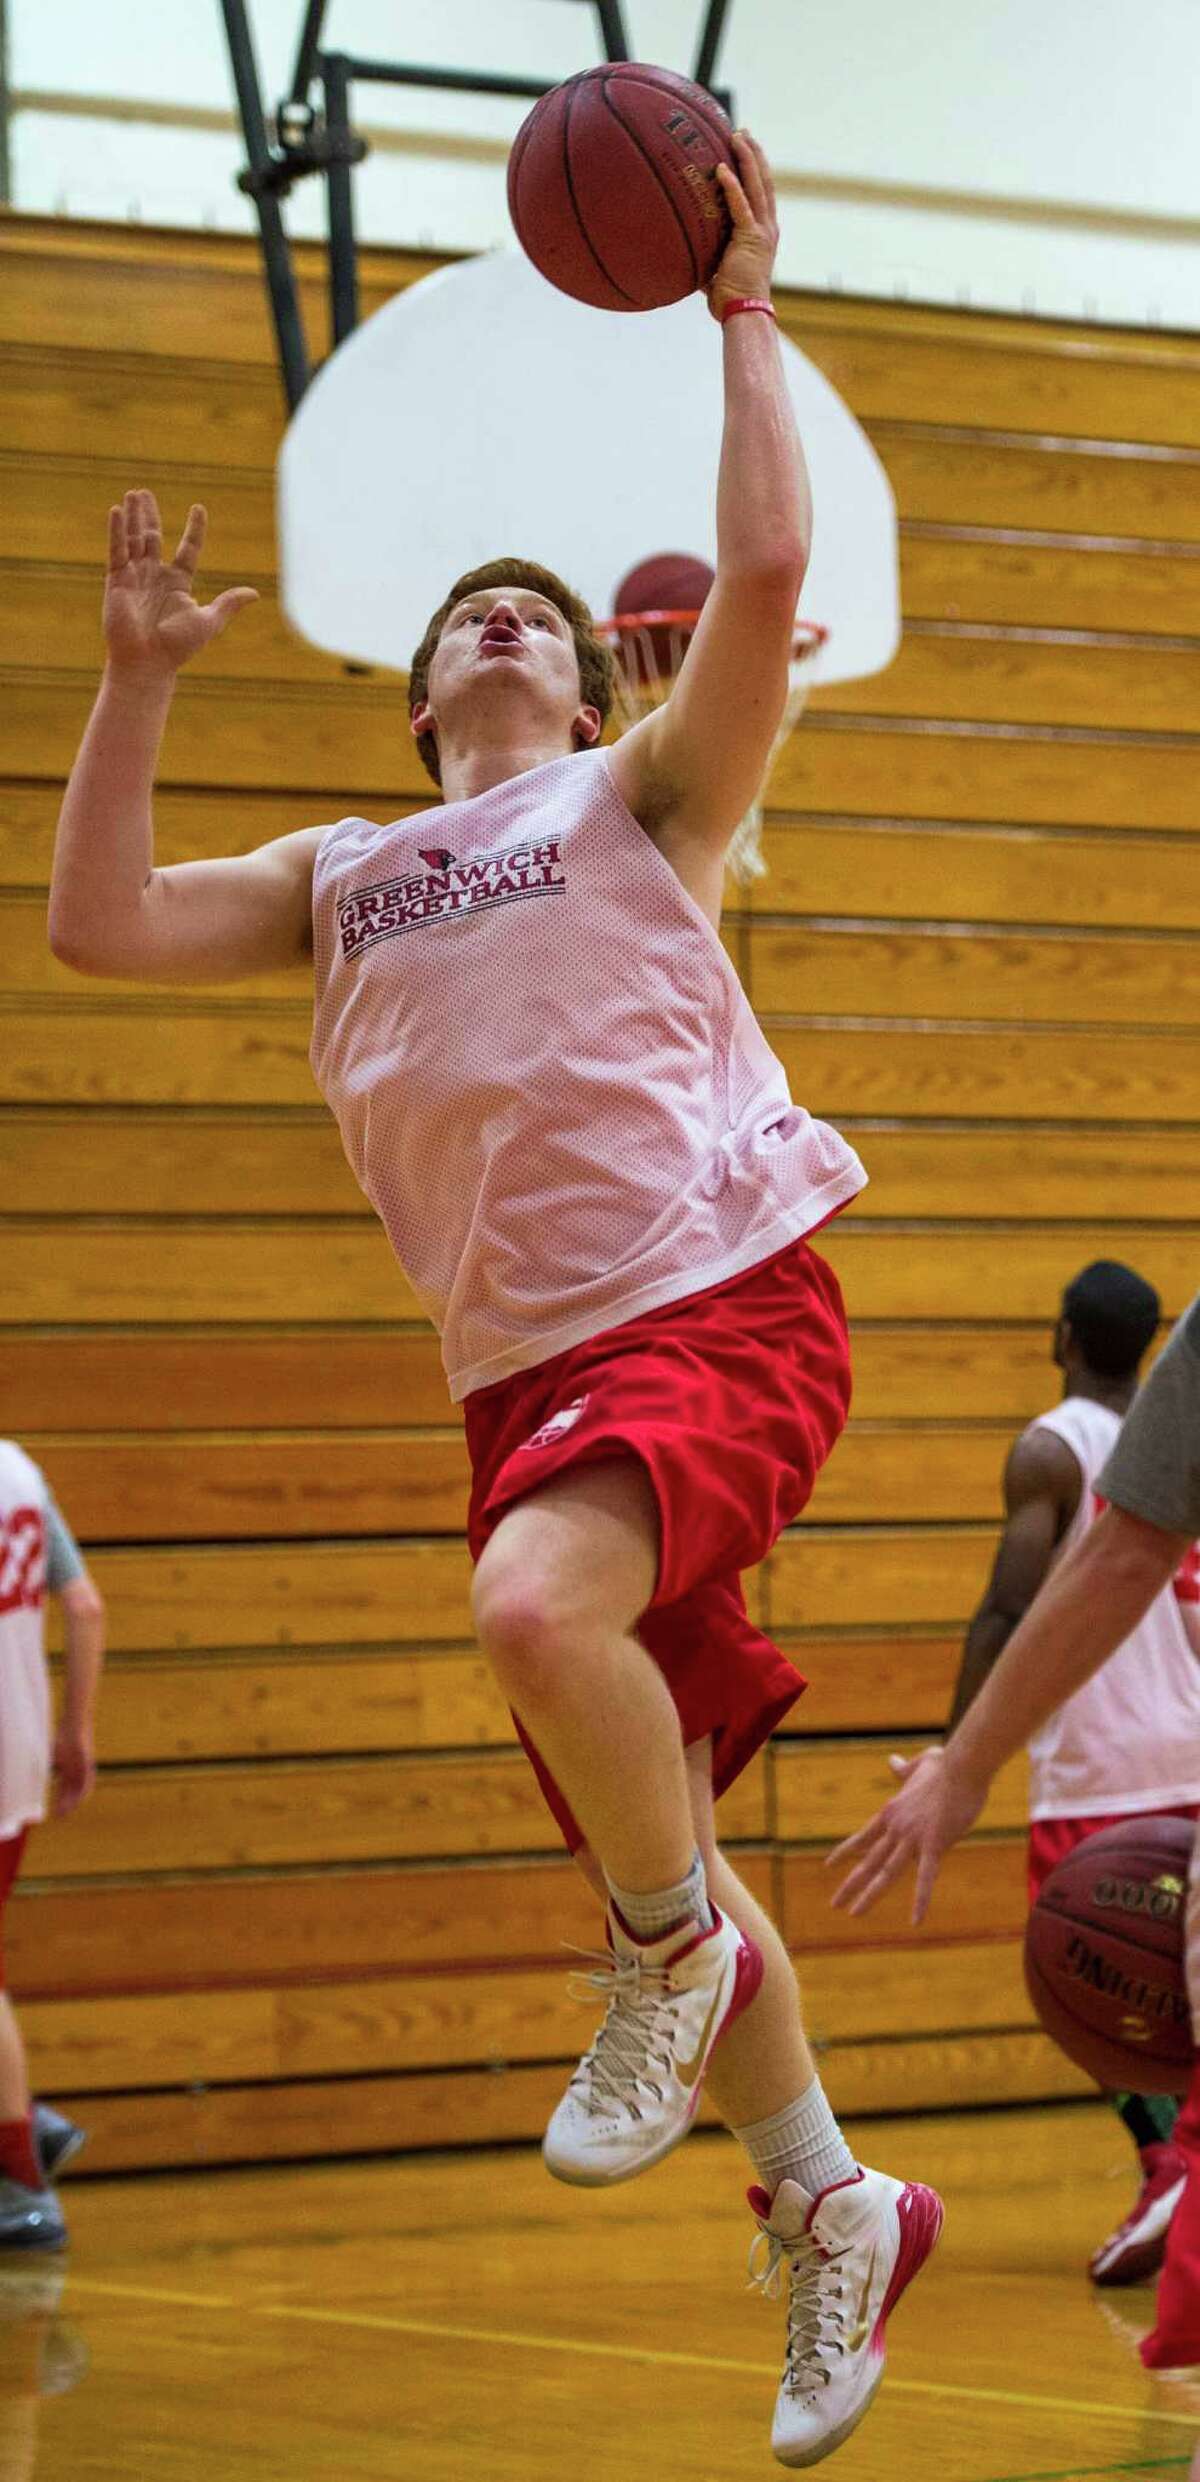 Greenwich high schoolâÄôs Griffin Golden going up for a layup during a boys varsity basketball practice held at Greenwich high school, Greenwich, CT on Tuesday, December 16th, 2014.